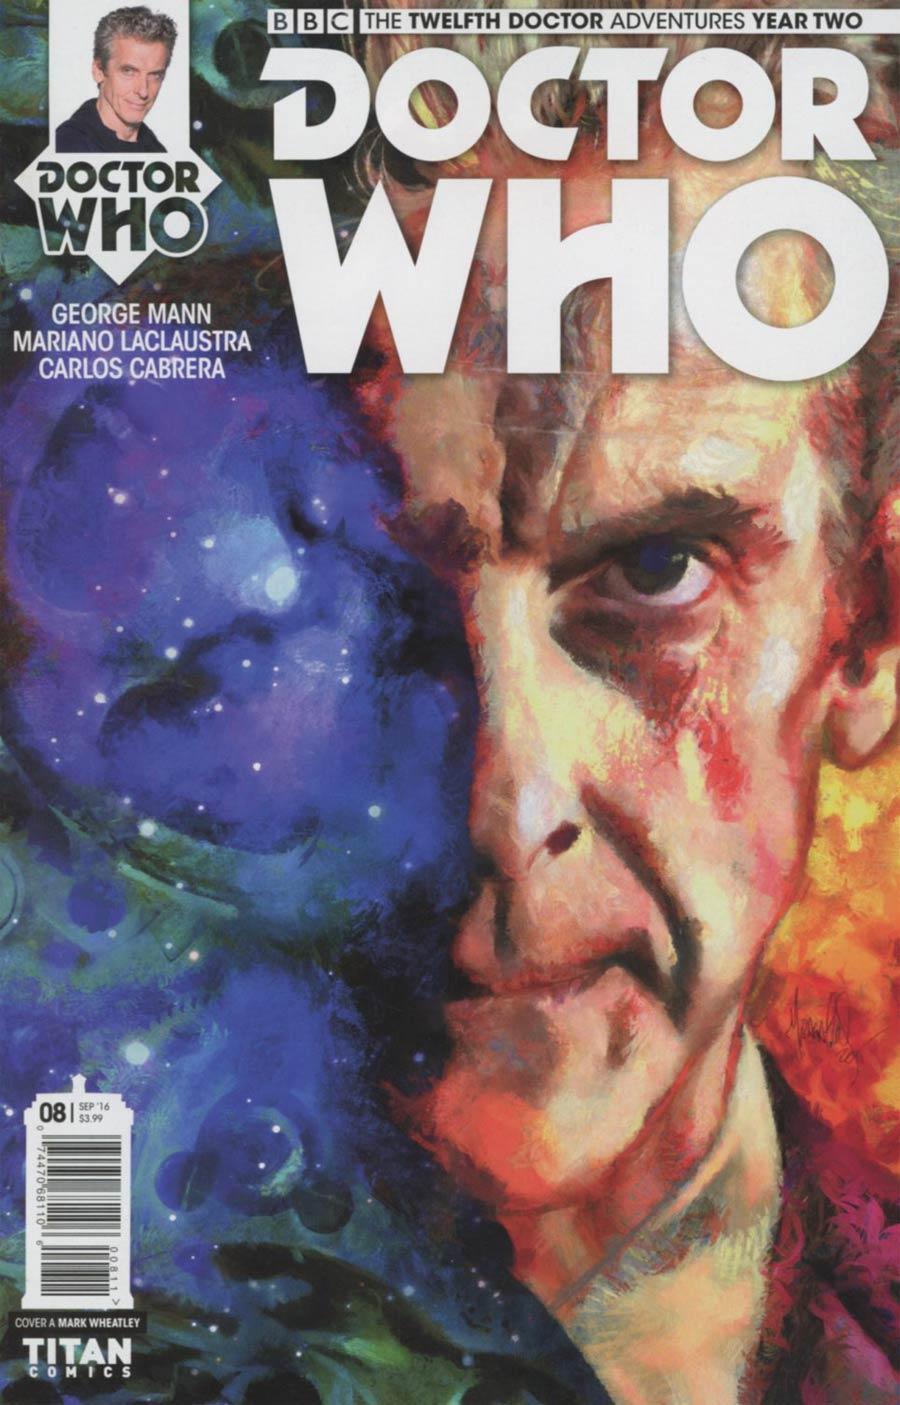 Doctor Who 12th Doctor Year Two Vol. 1 #8